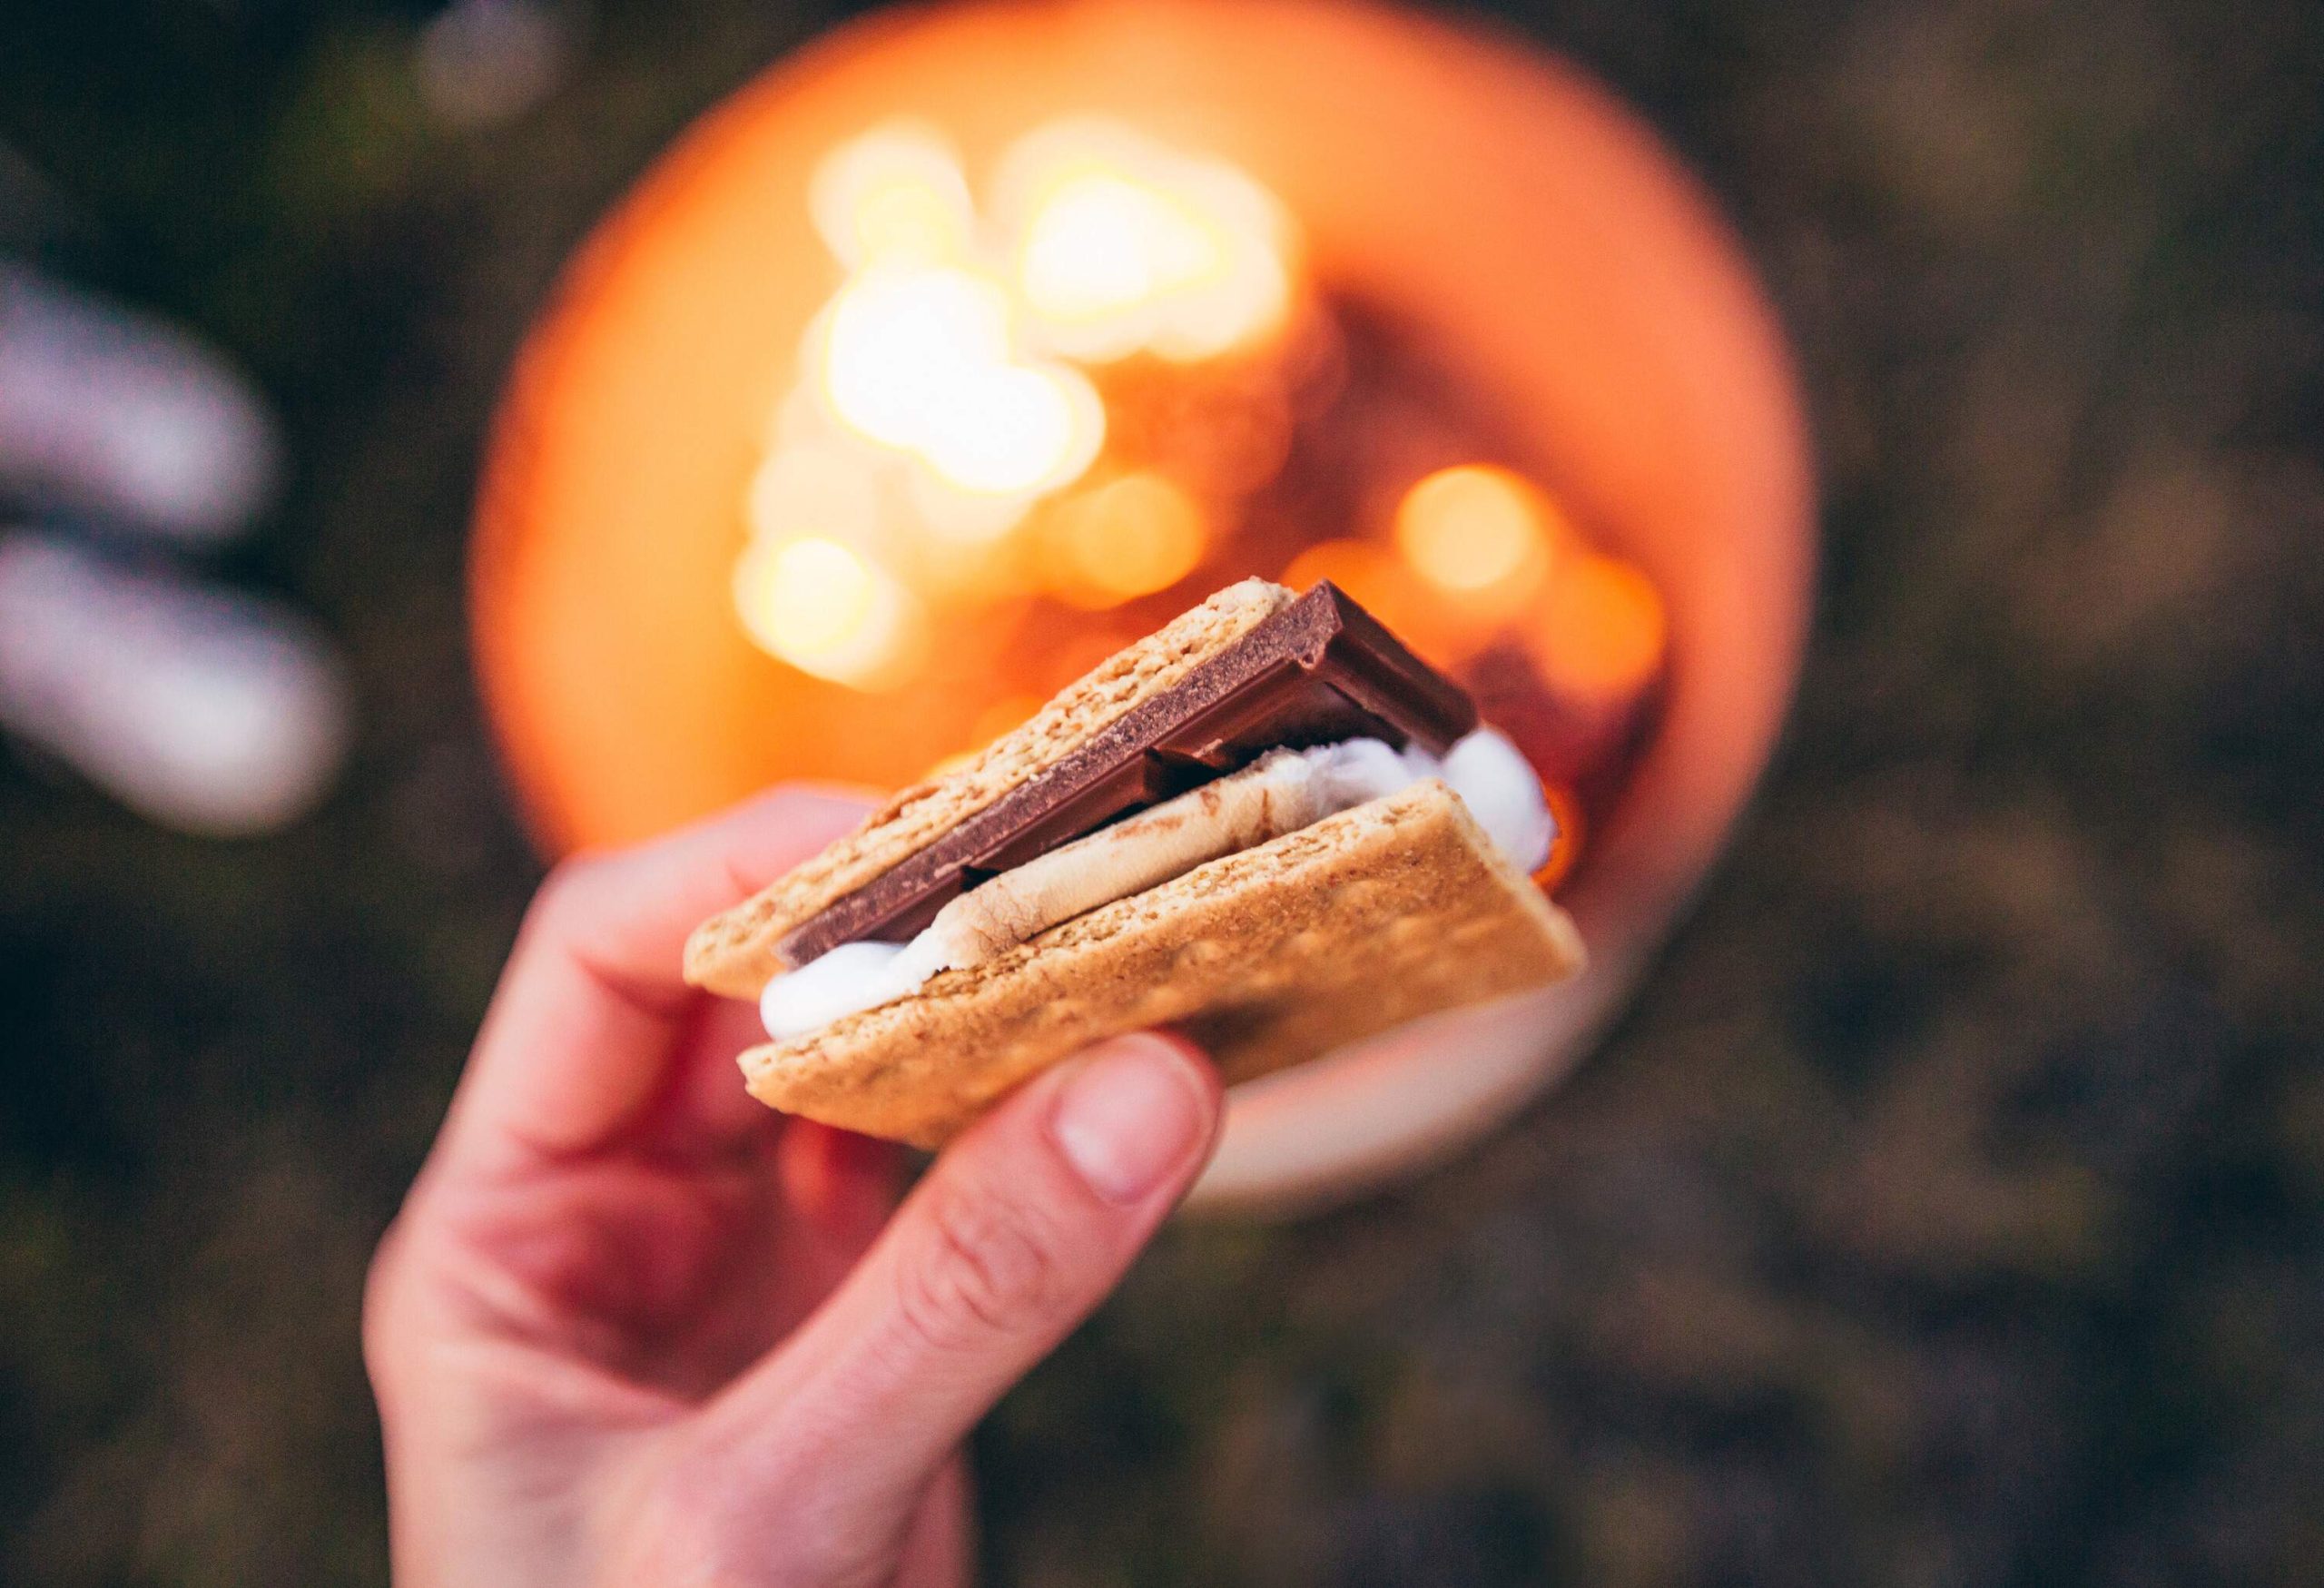 A hand holding a gooey s'more with toasted marshmallow and melting chocolate.